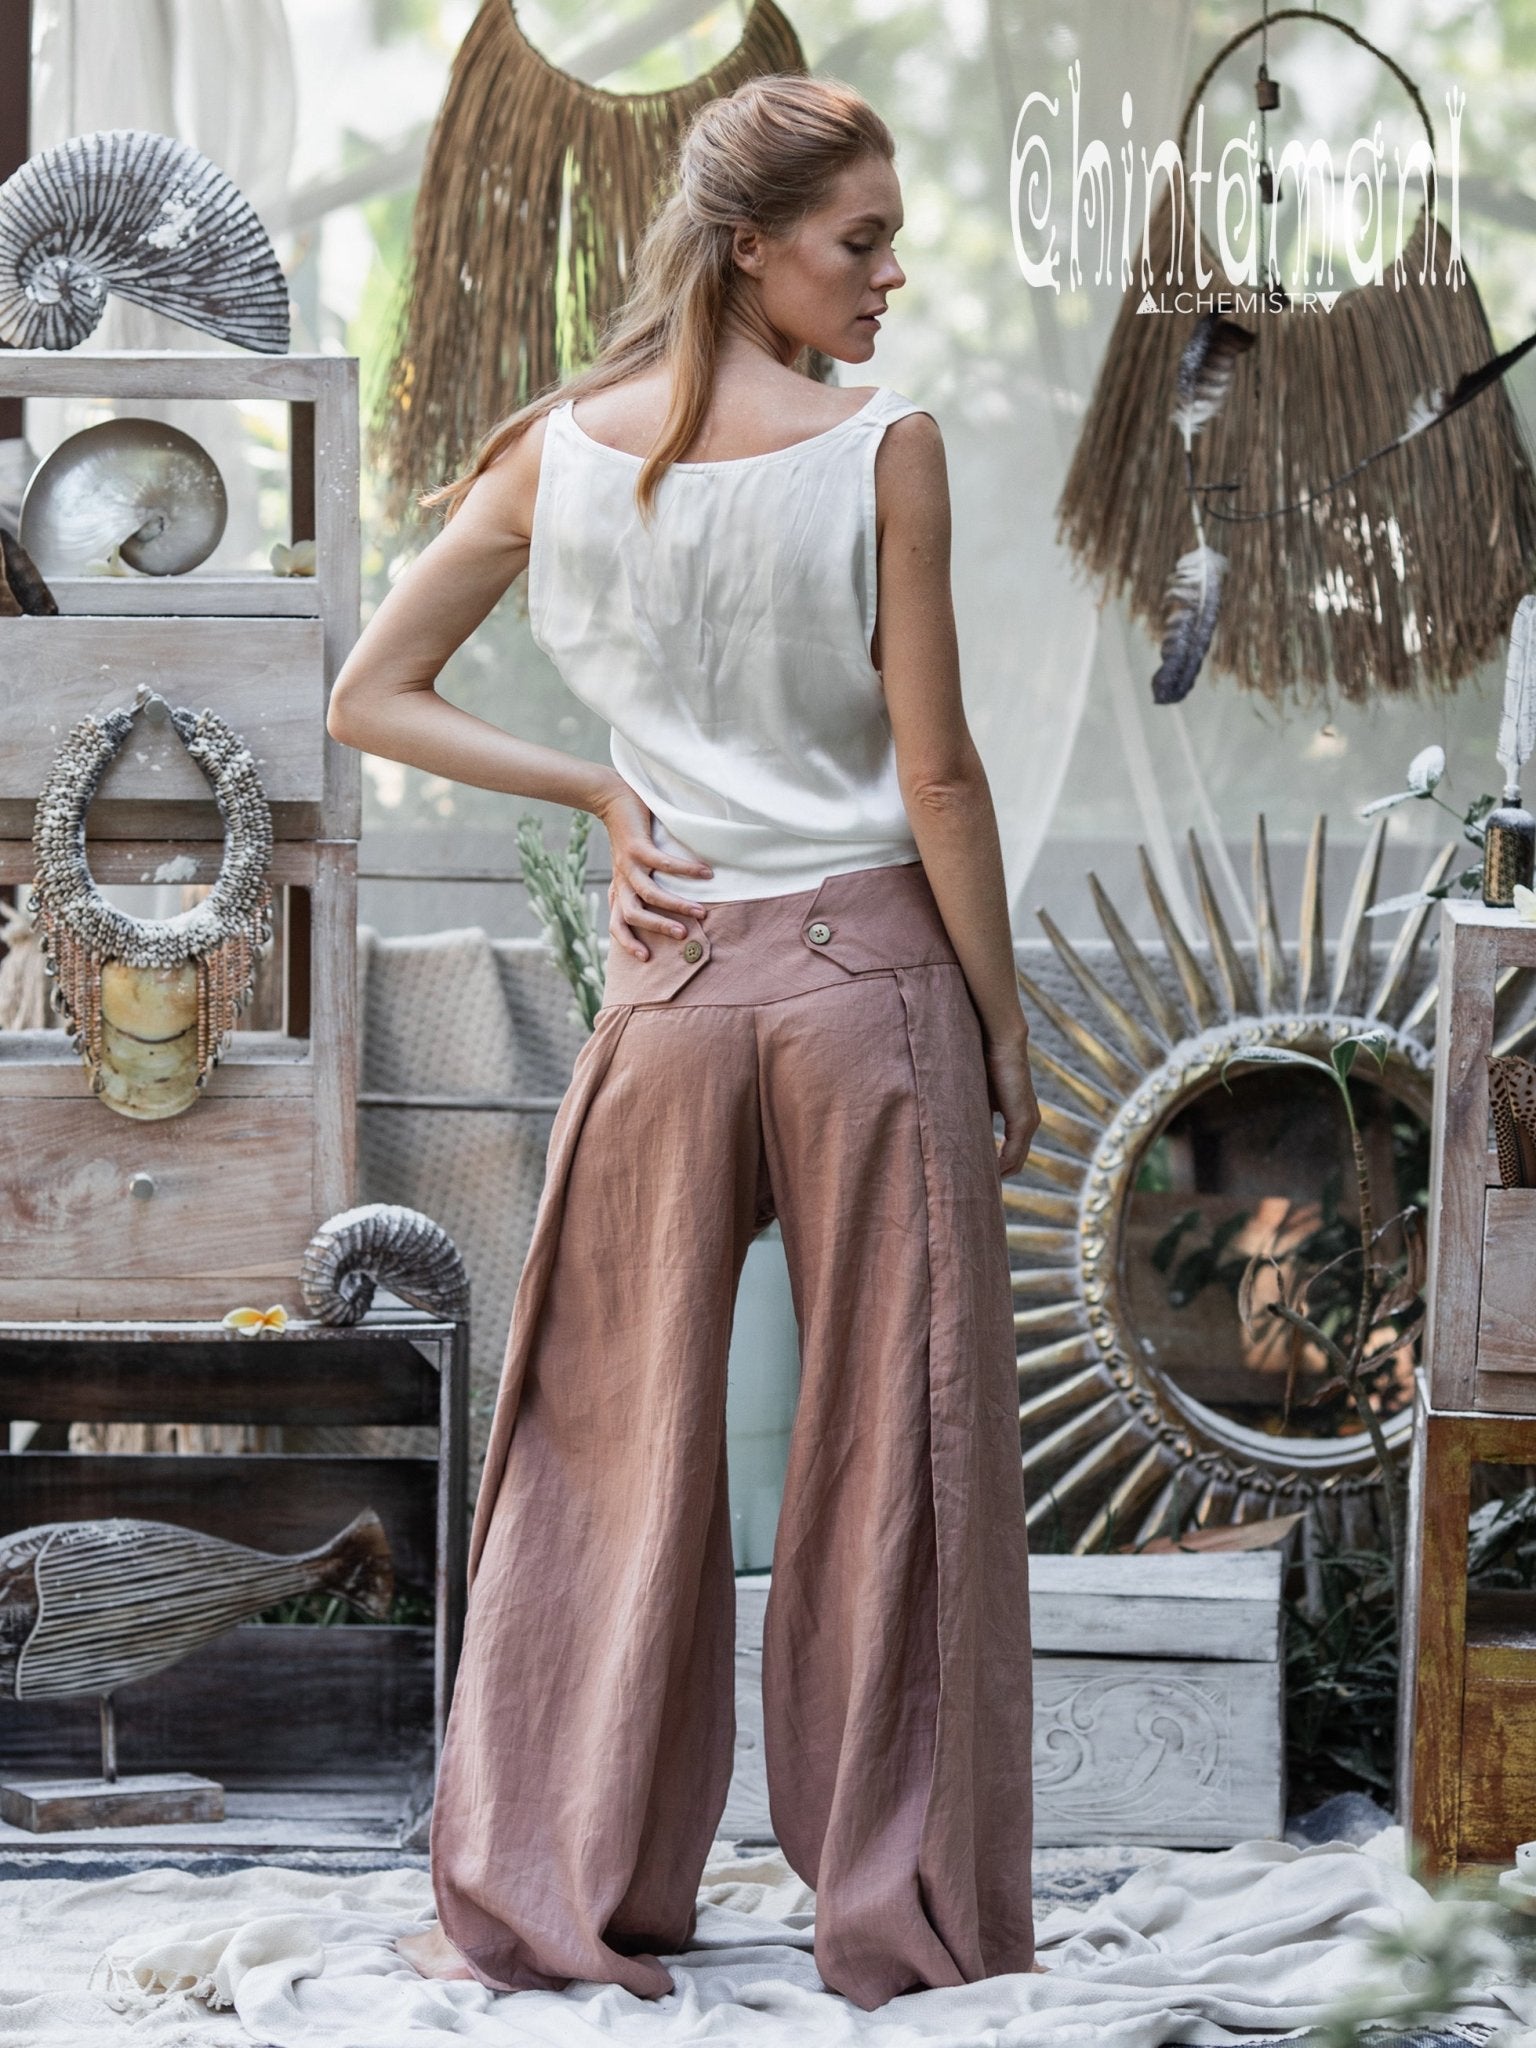 Harem Style Boho Beach Pants or Lounge Pants Women's S/M – Elle and Willow